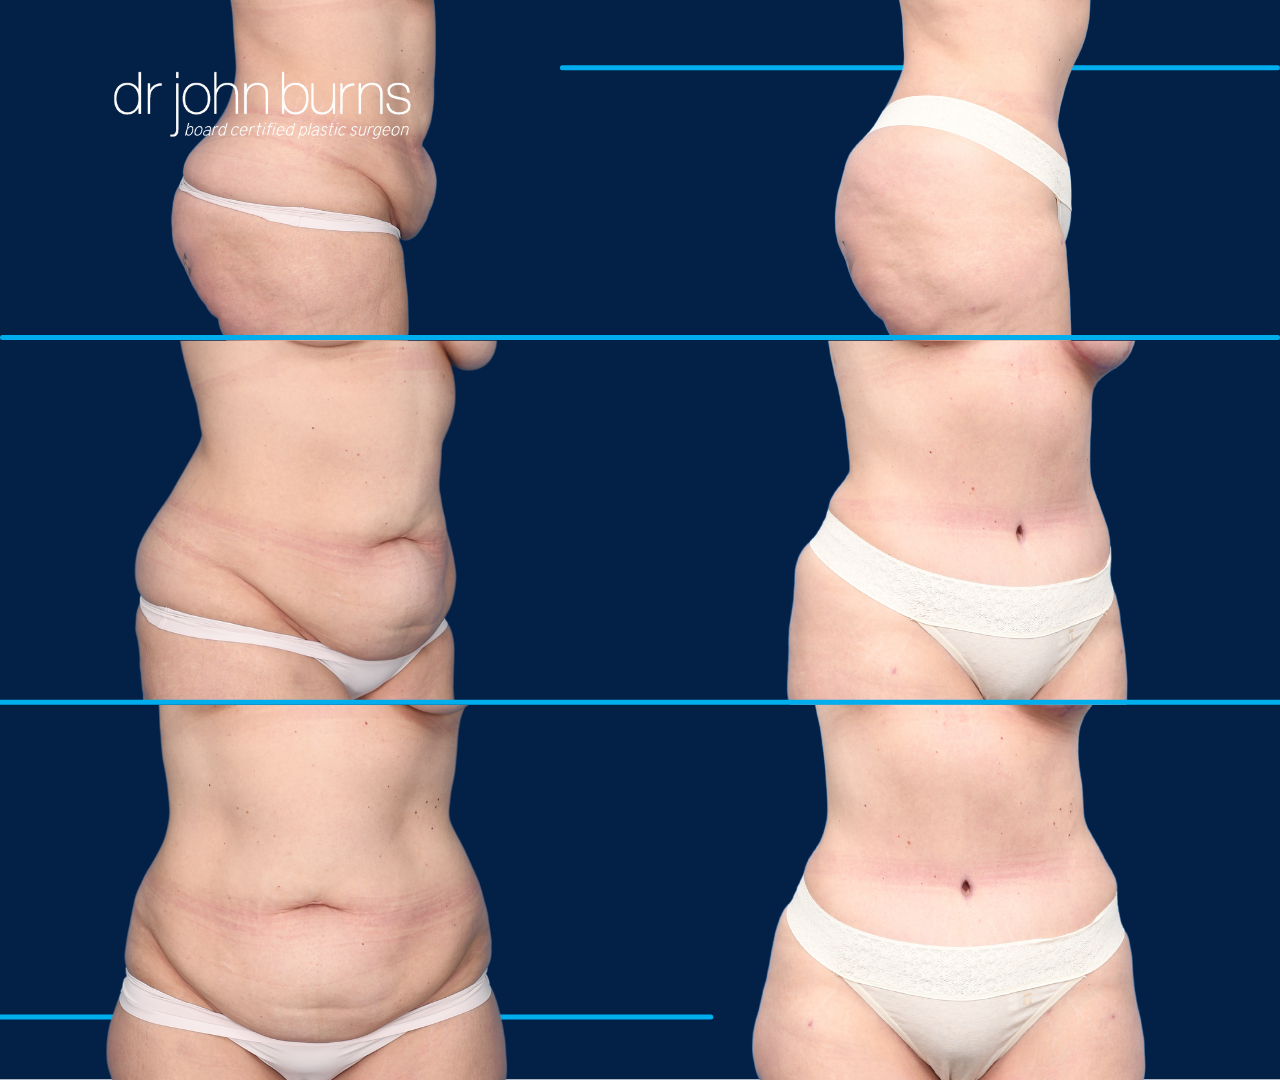 Before & After Hourglass Tummy Tuck by Dallas Plastic Surgeon, Dr. John Burns